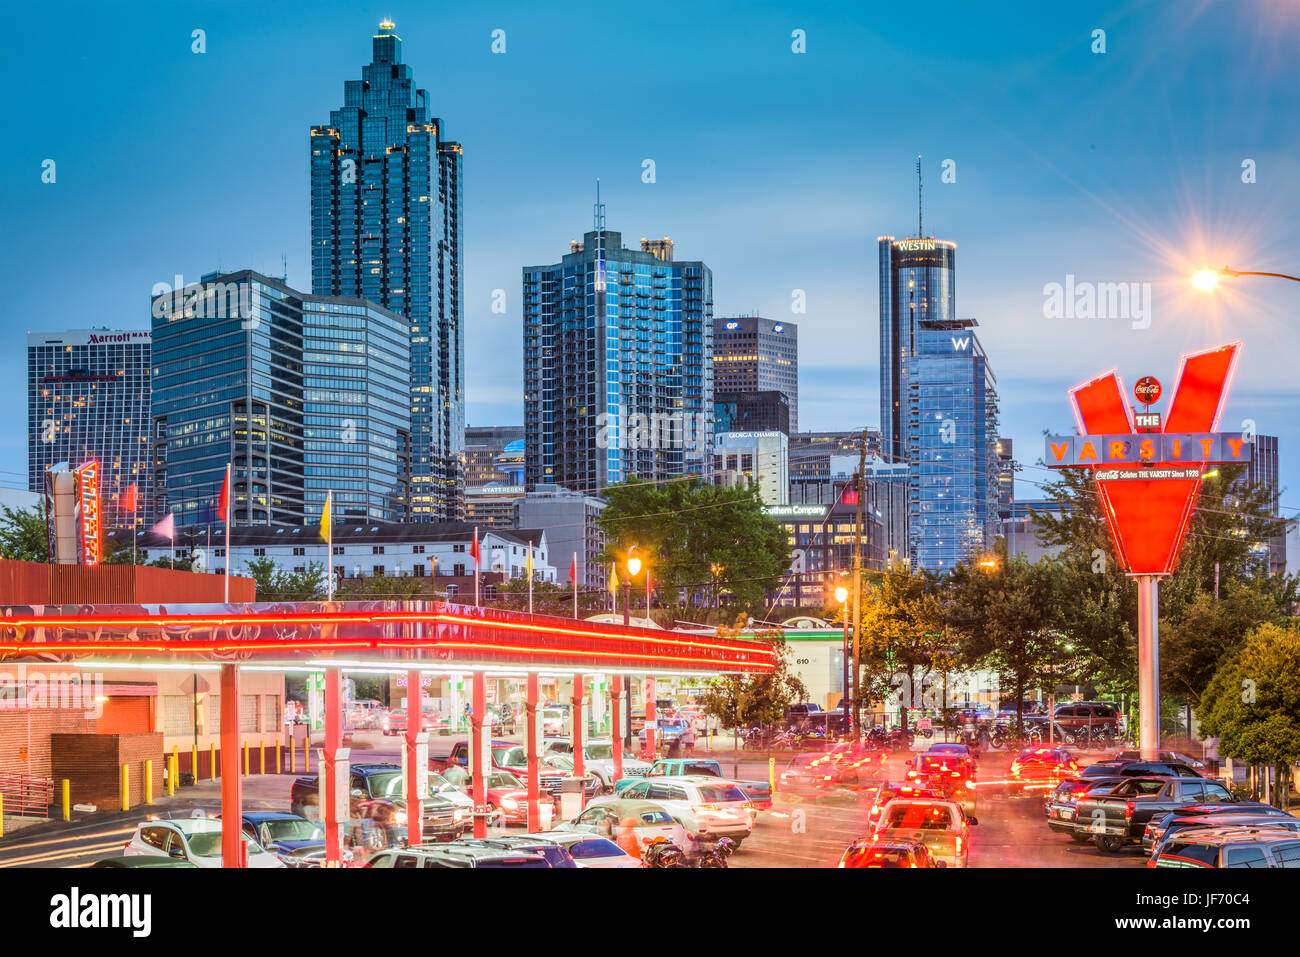 ATLANTA, GEORGIA - JUNE 25, 2017: Traffic forms at the Varsity in downtown Atlanta. The Varsity is an iconic fastfood restaurant chain with branches a Stock Photo